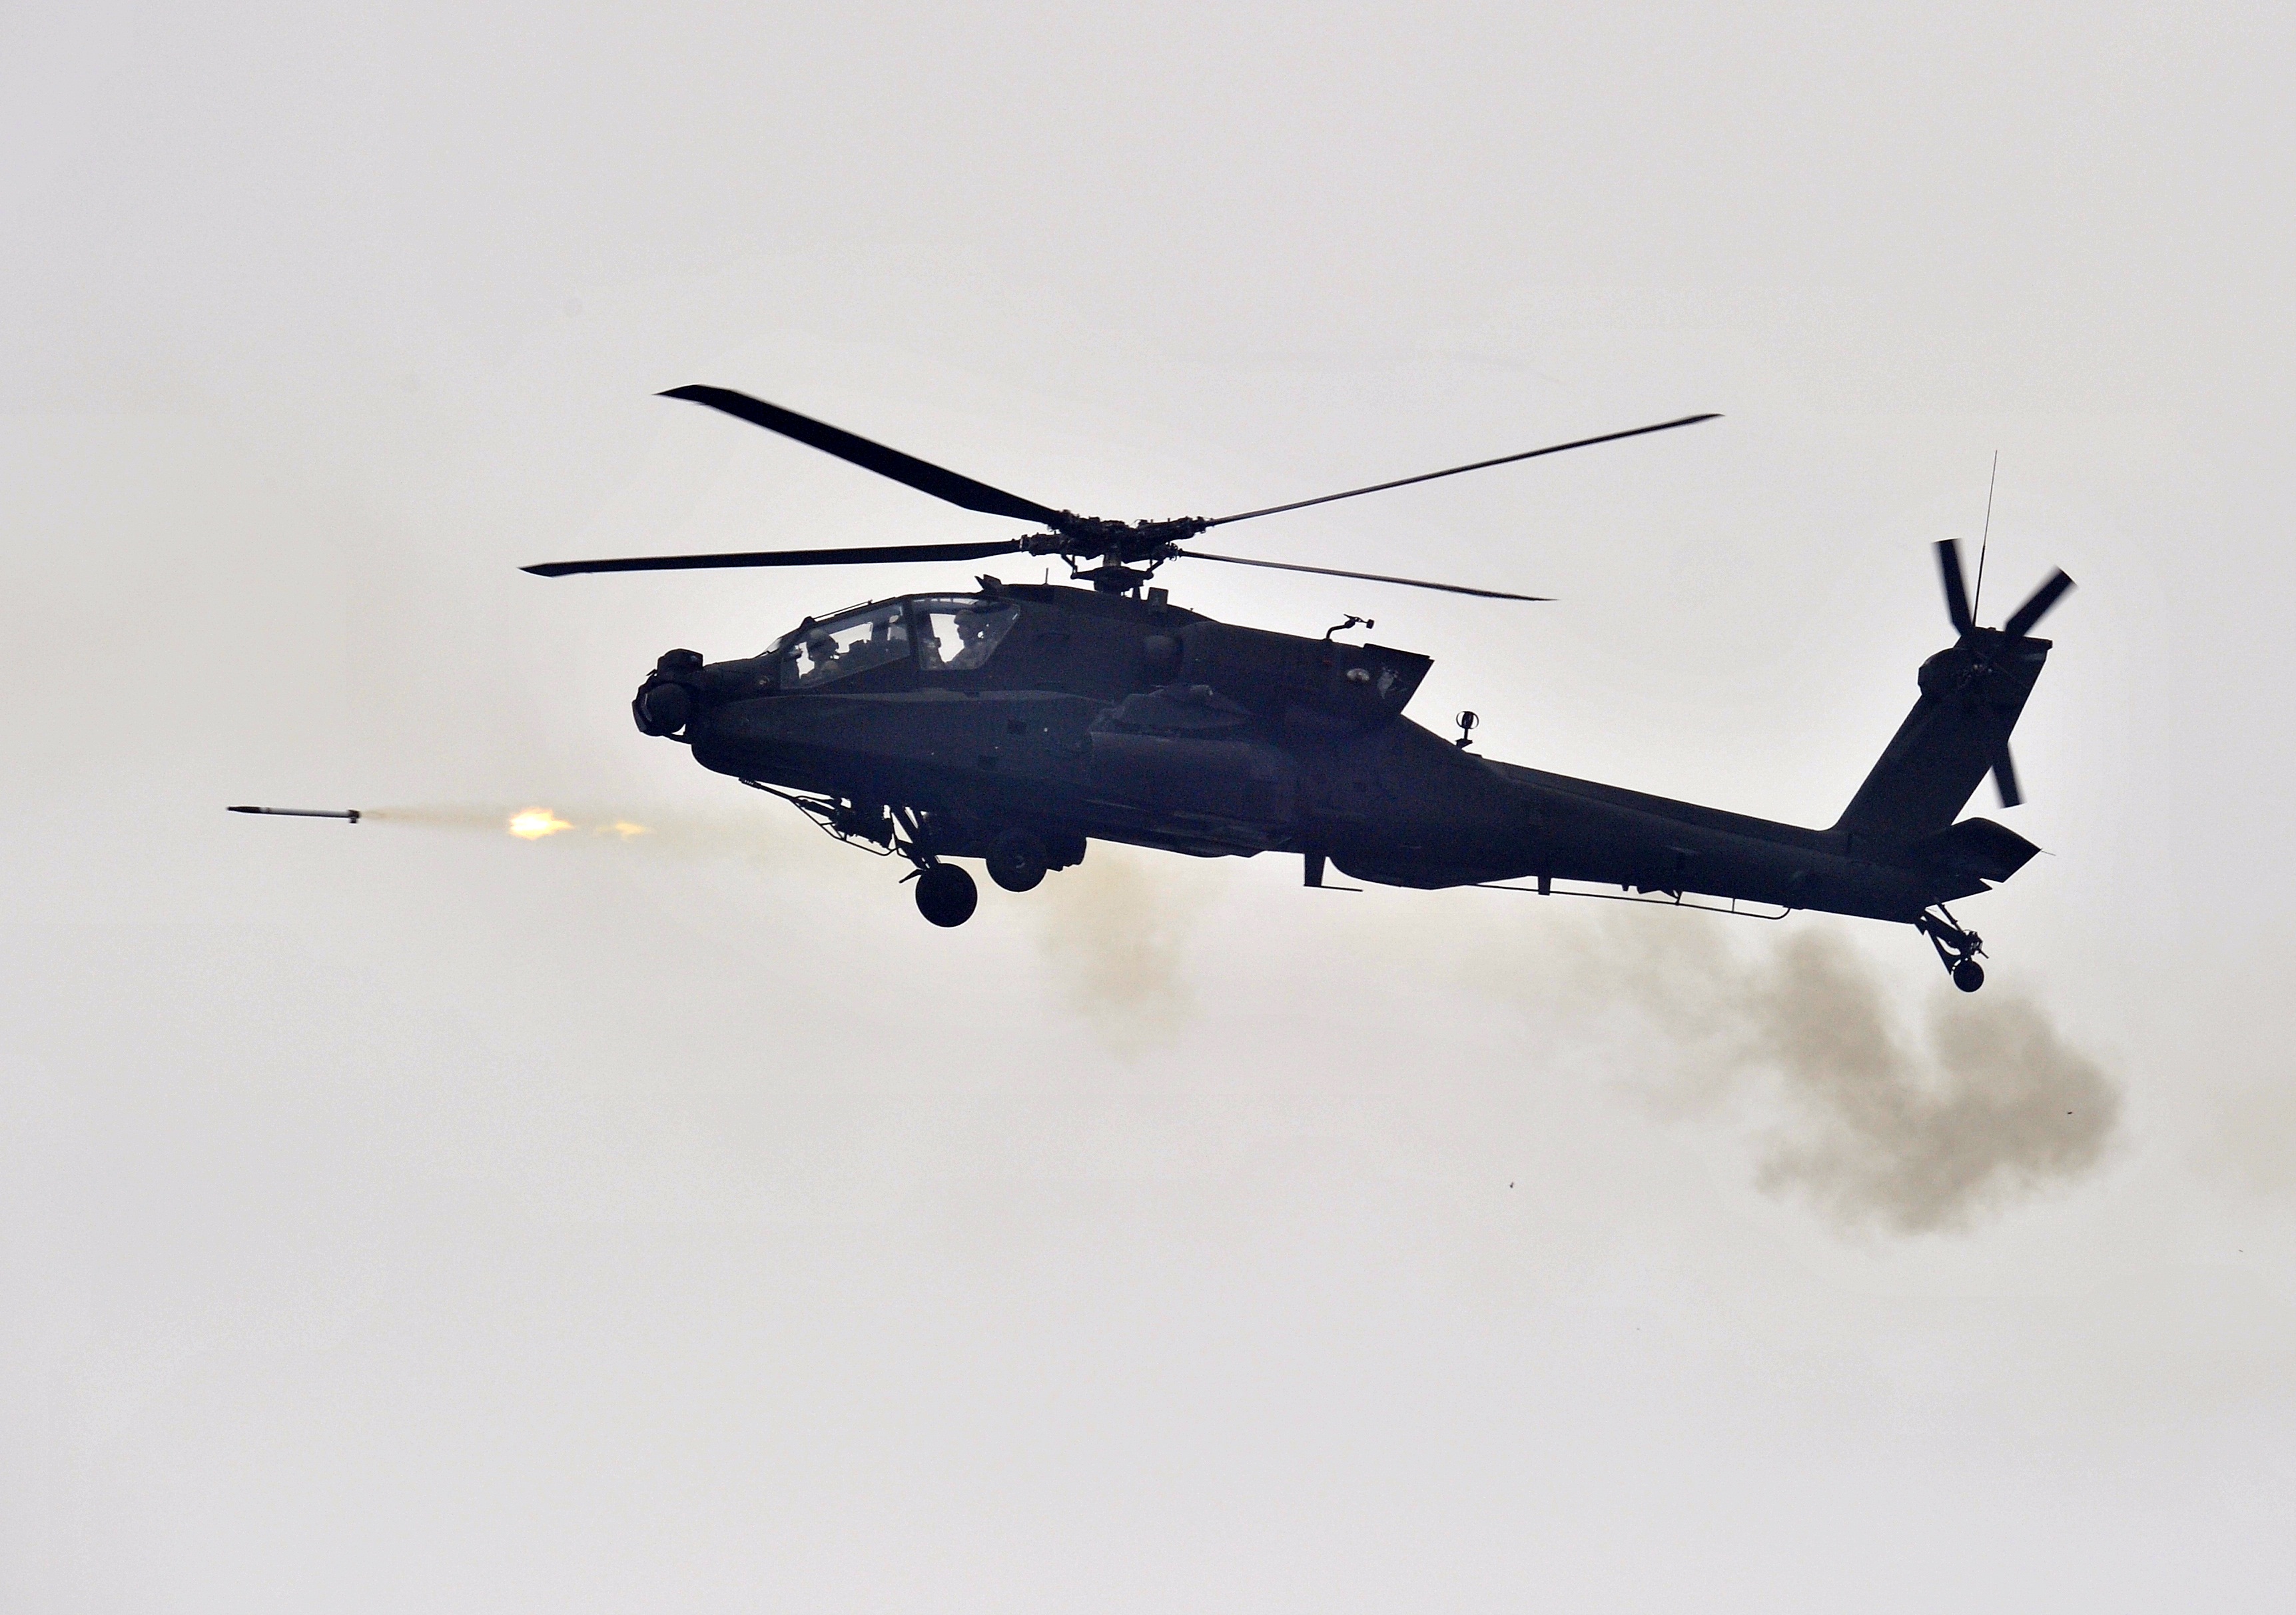 Eight AH-64 Apache helicopter gunships are headed to Iraq to help fight ISIS. (JUNG YEON-JE / AFP / Getty Images)